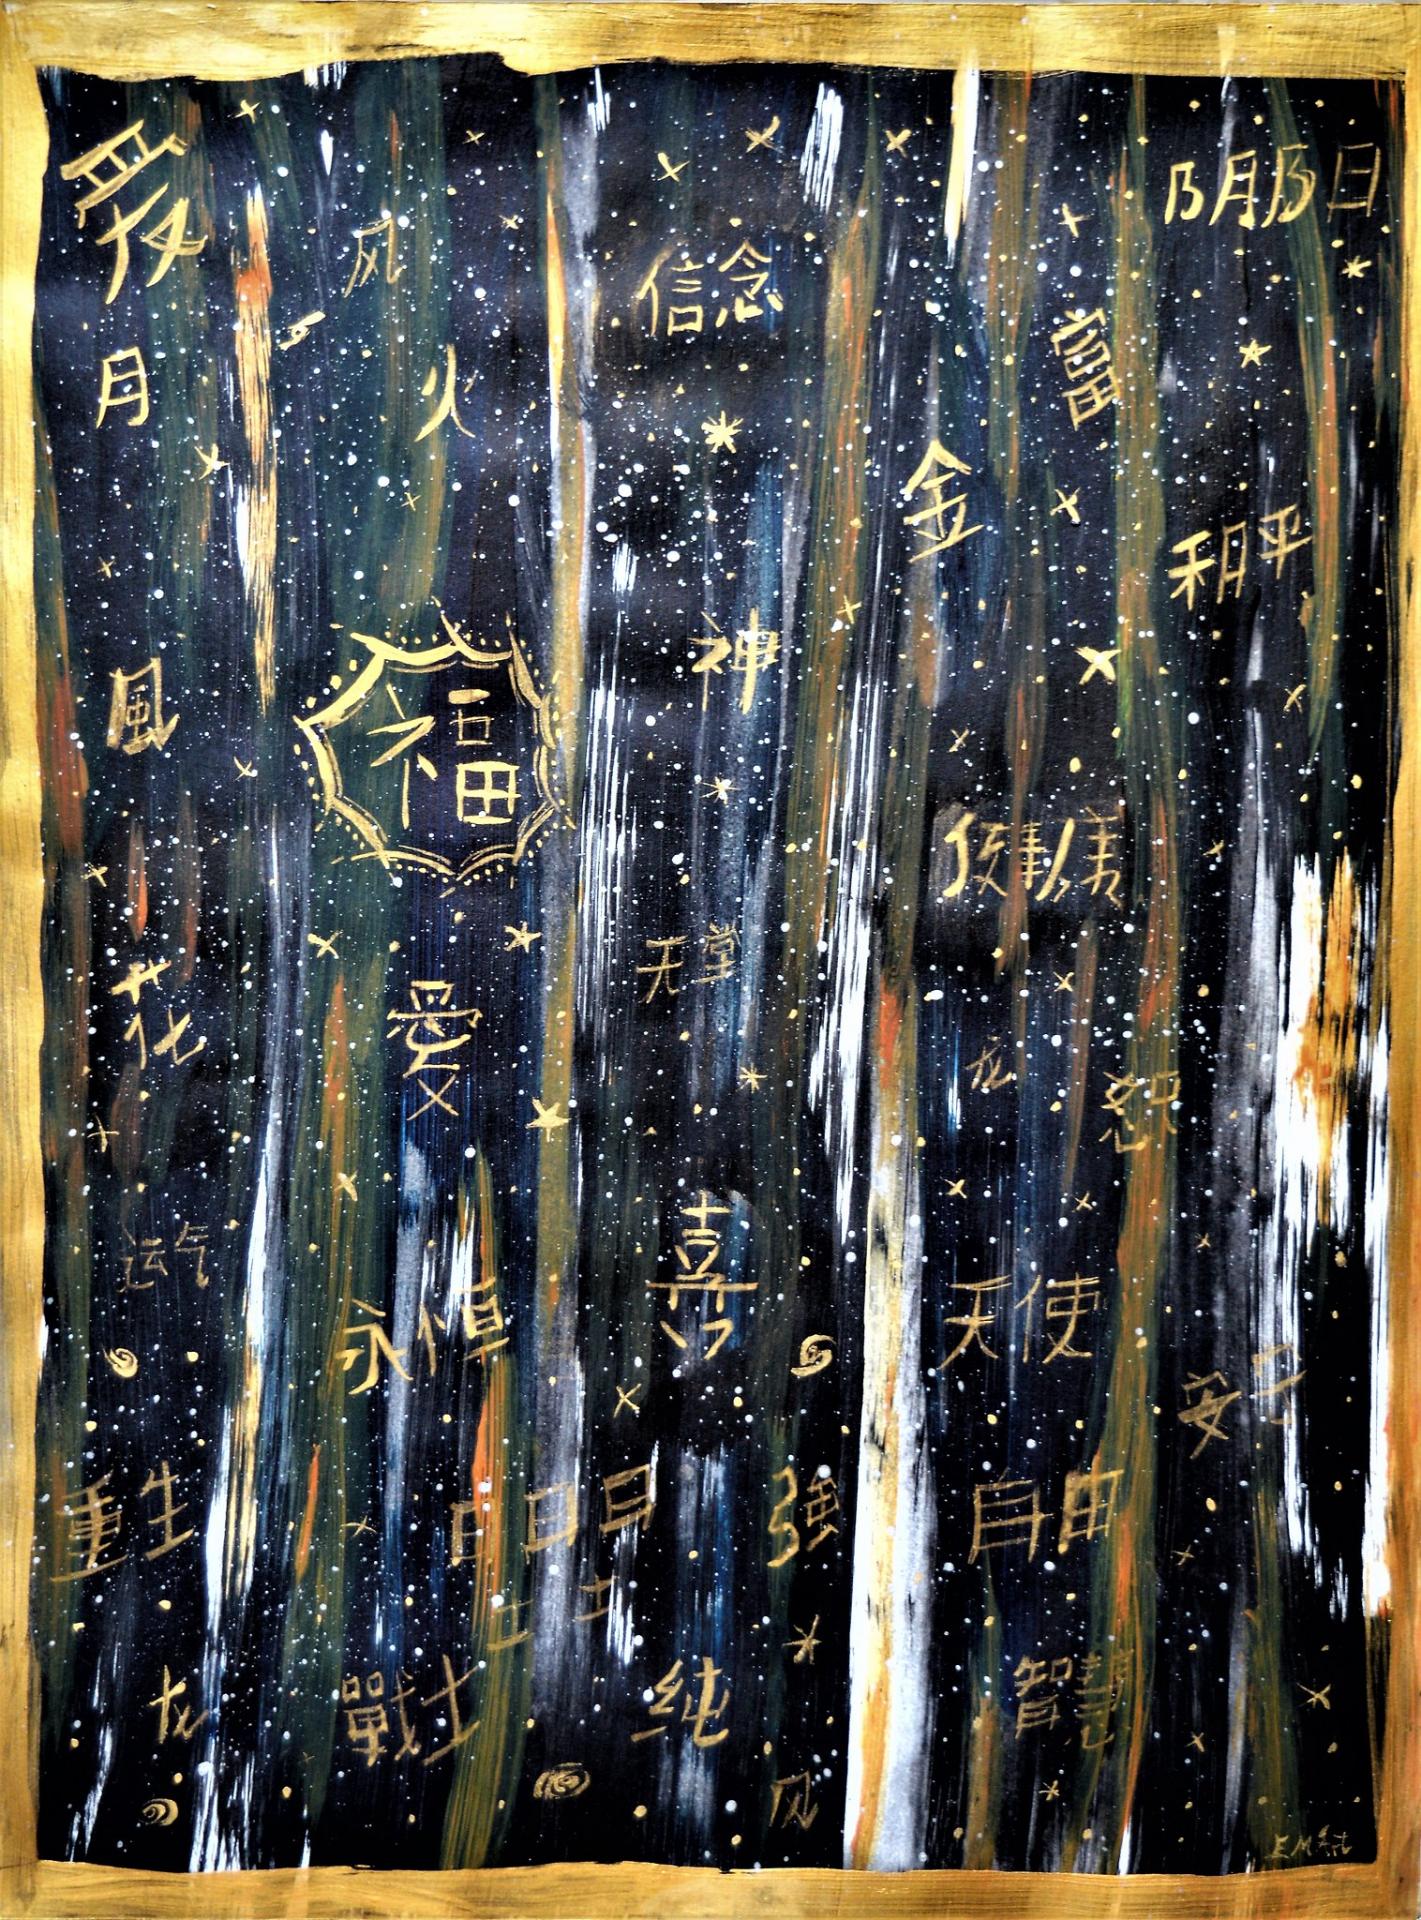 Wishes, chinese symbols in acrylic on paper by Emmanuelle Baudry